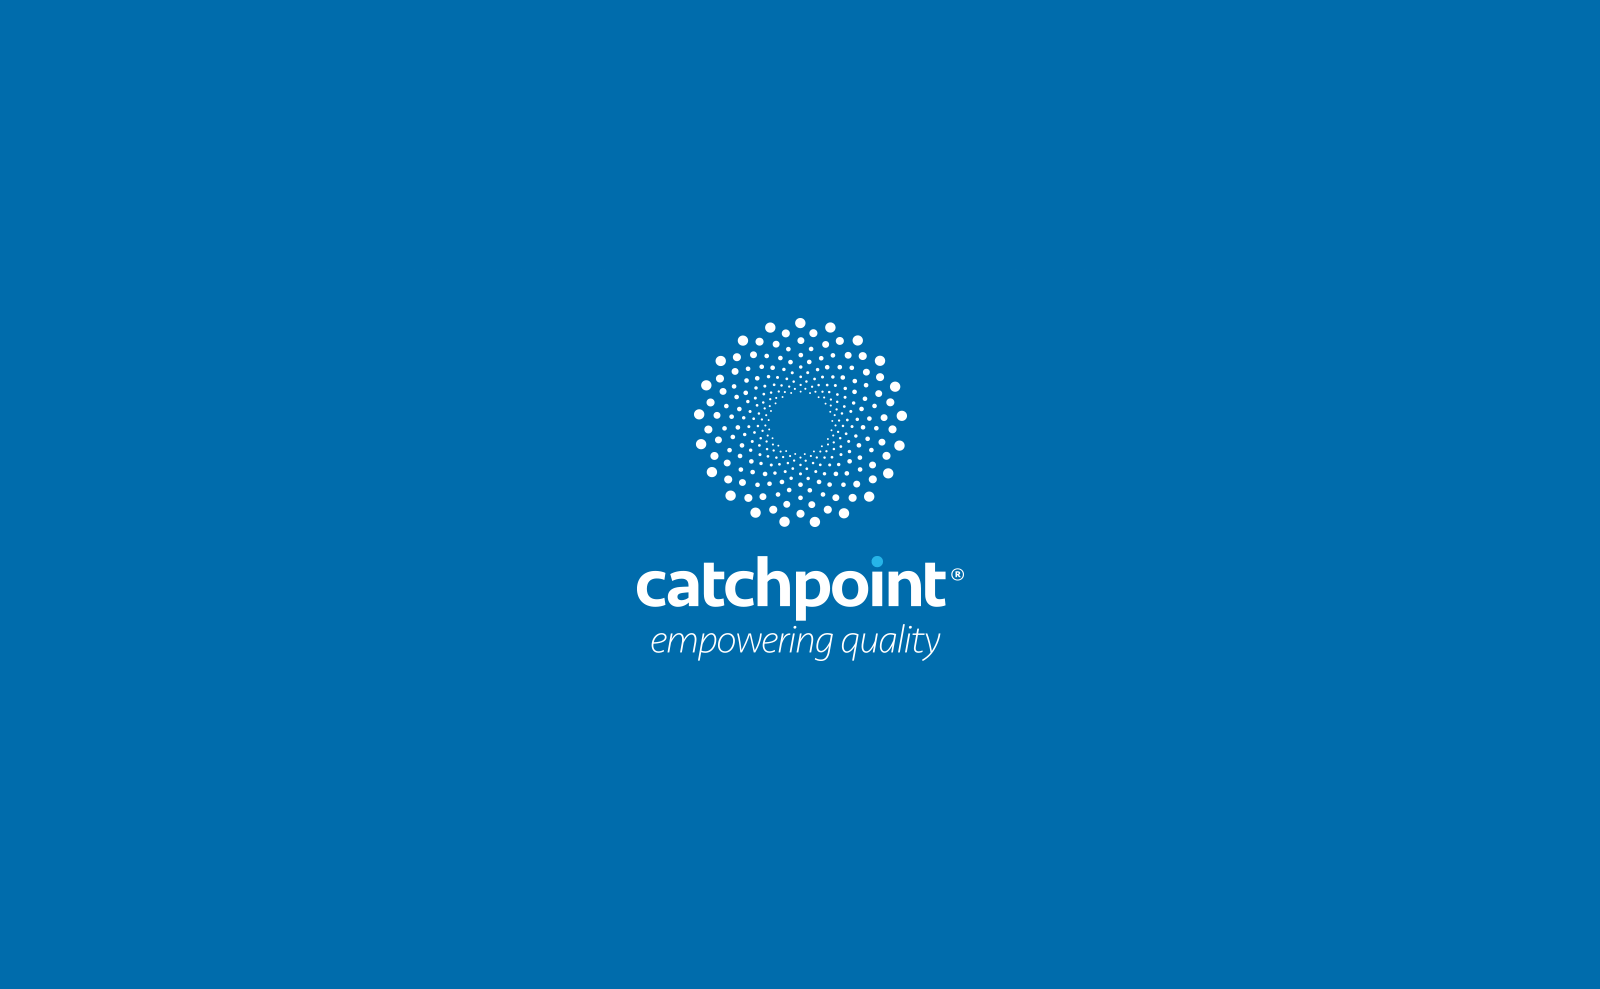 Catchpoint Logo